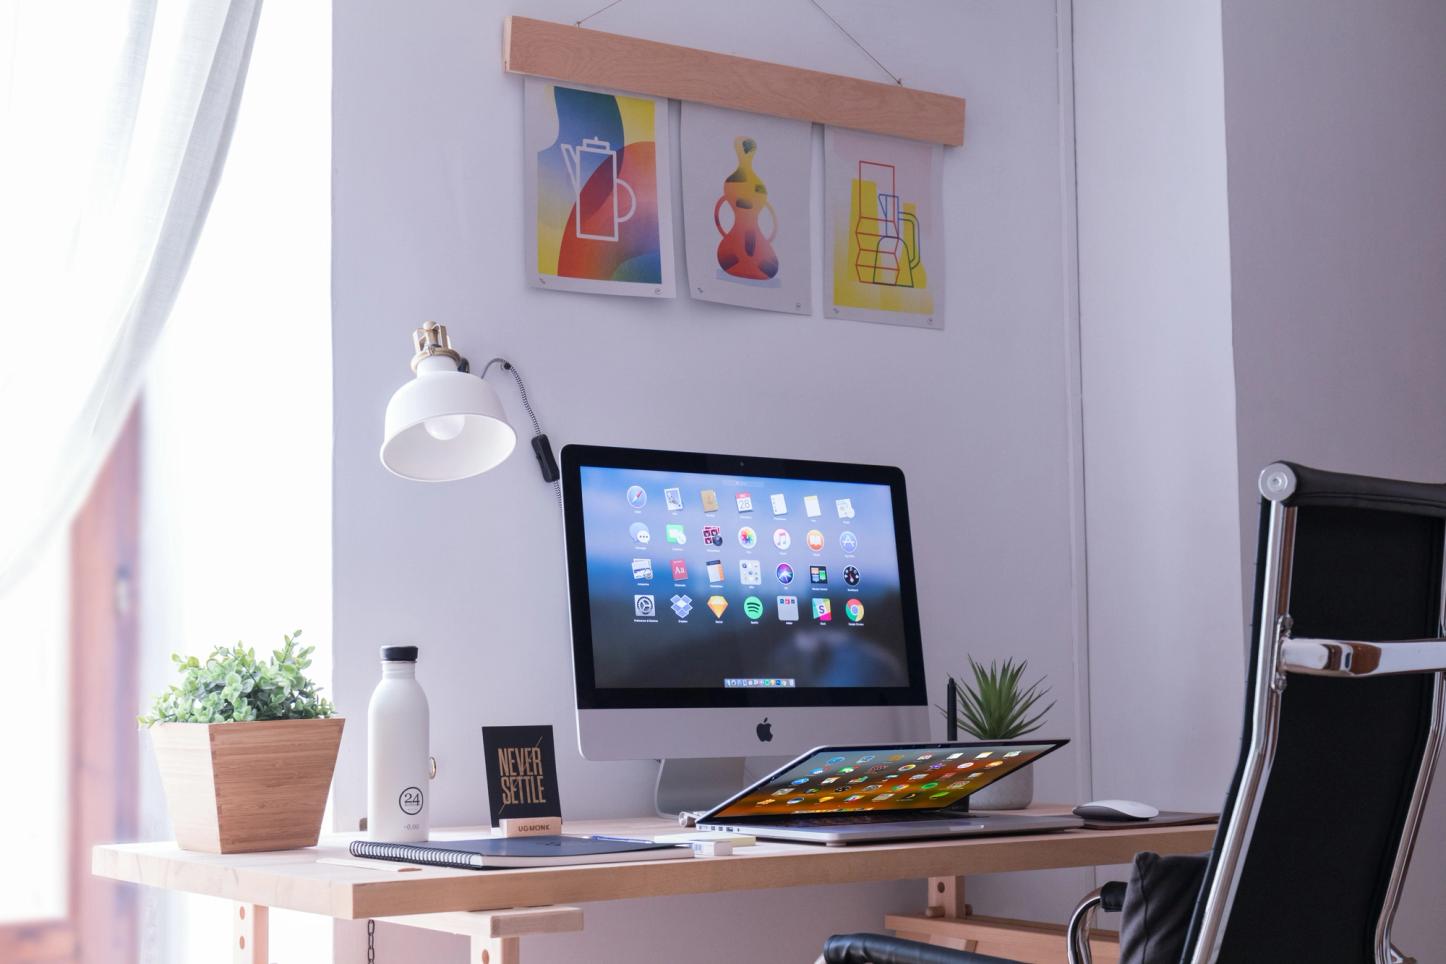 A home office set up with a wooden desk hosting an iMac with its screen showing an array of app icons. In front of the iMac, a MacBook lies flat and is partly closed, displaying a similar colorful screen. On both sides of the iMac is a small potted plant. On the right side is a white water bottle and a small black notebook. A white lamp is positioned to the left of the desk, behnd the iMac.  Three framed art prints hang above the the table on the wall. To the right, there's a black office chair with a chrome frame. The room has a cozy feel with soft natural light filtering through a curtain on the left, indicating a window just outside the frame.